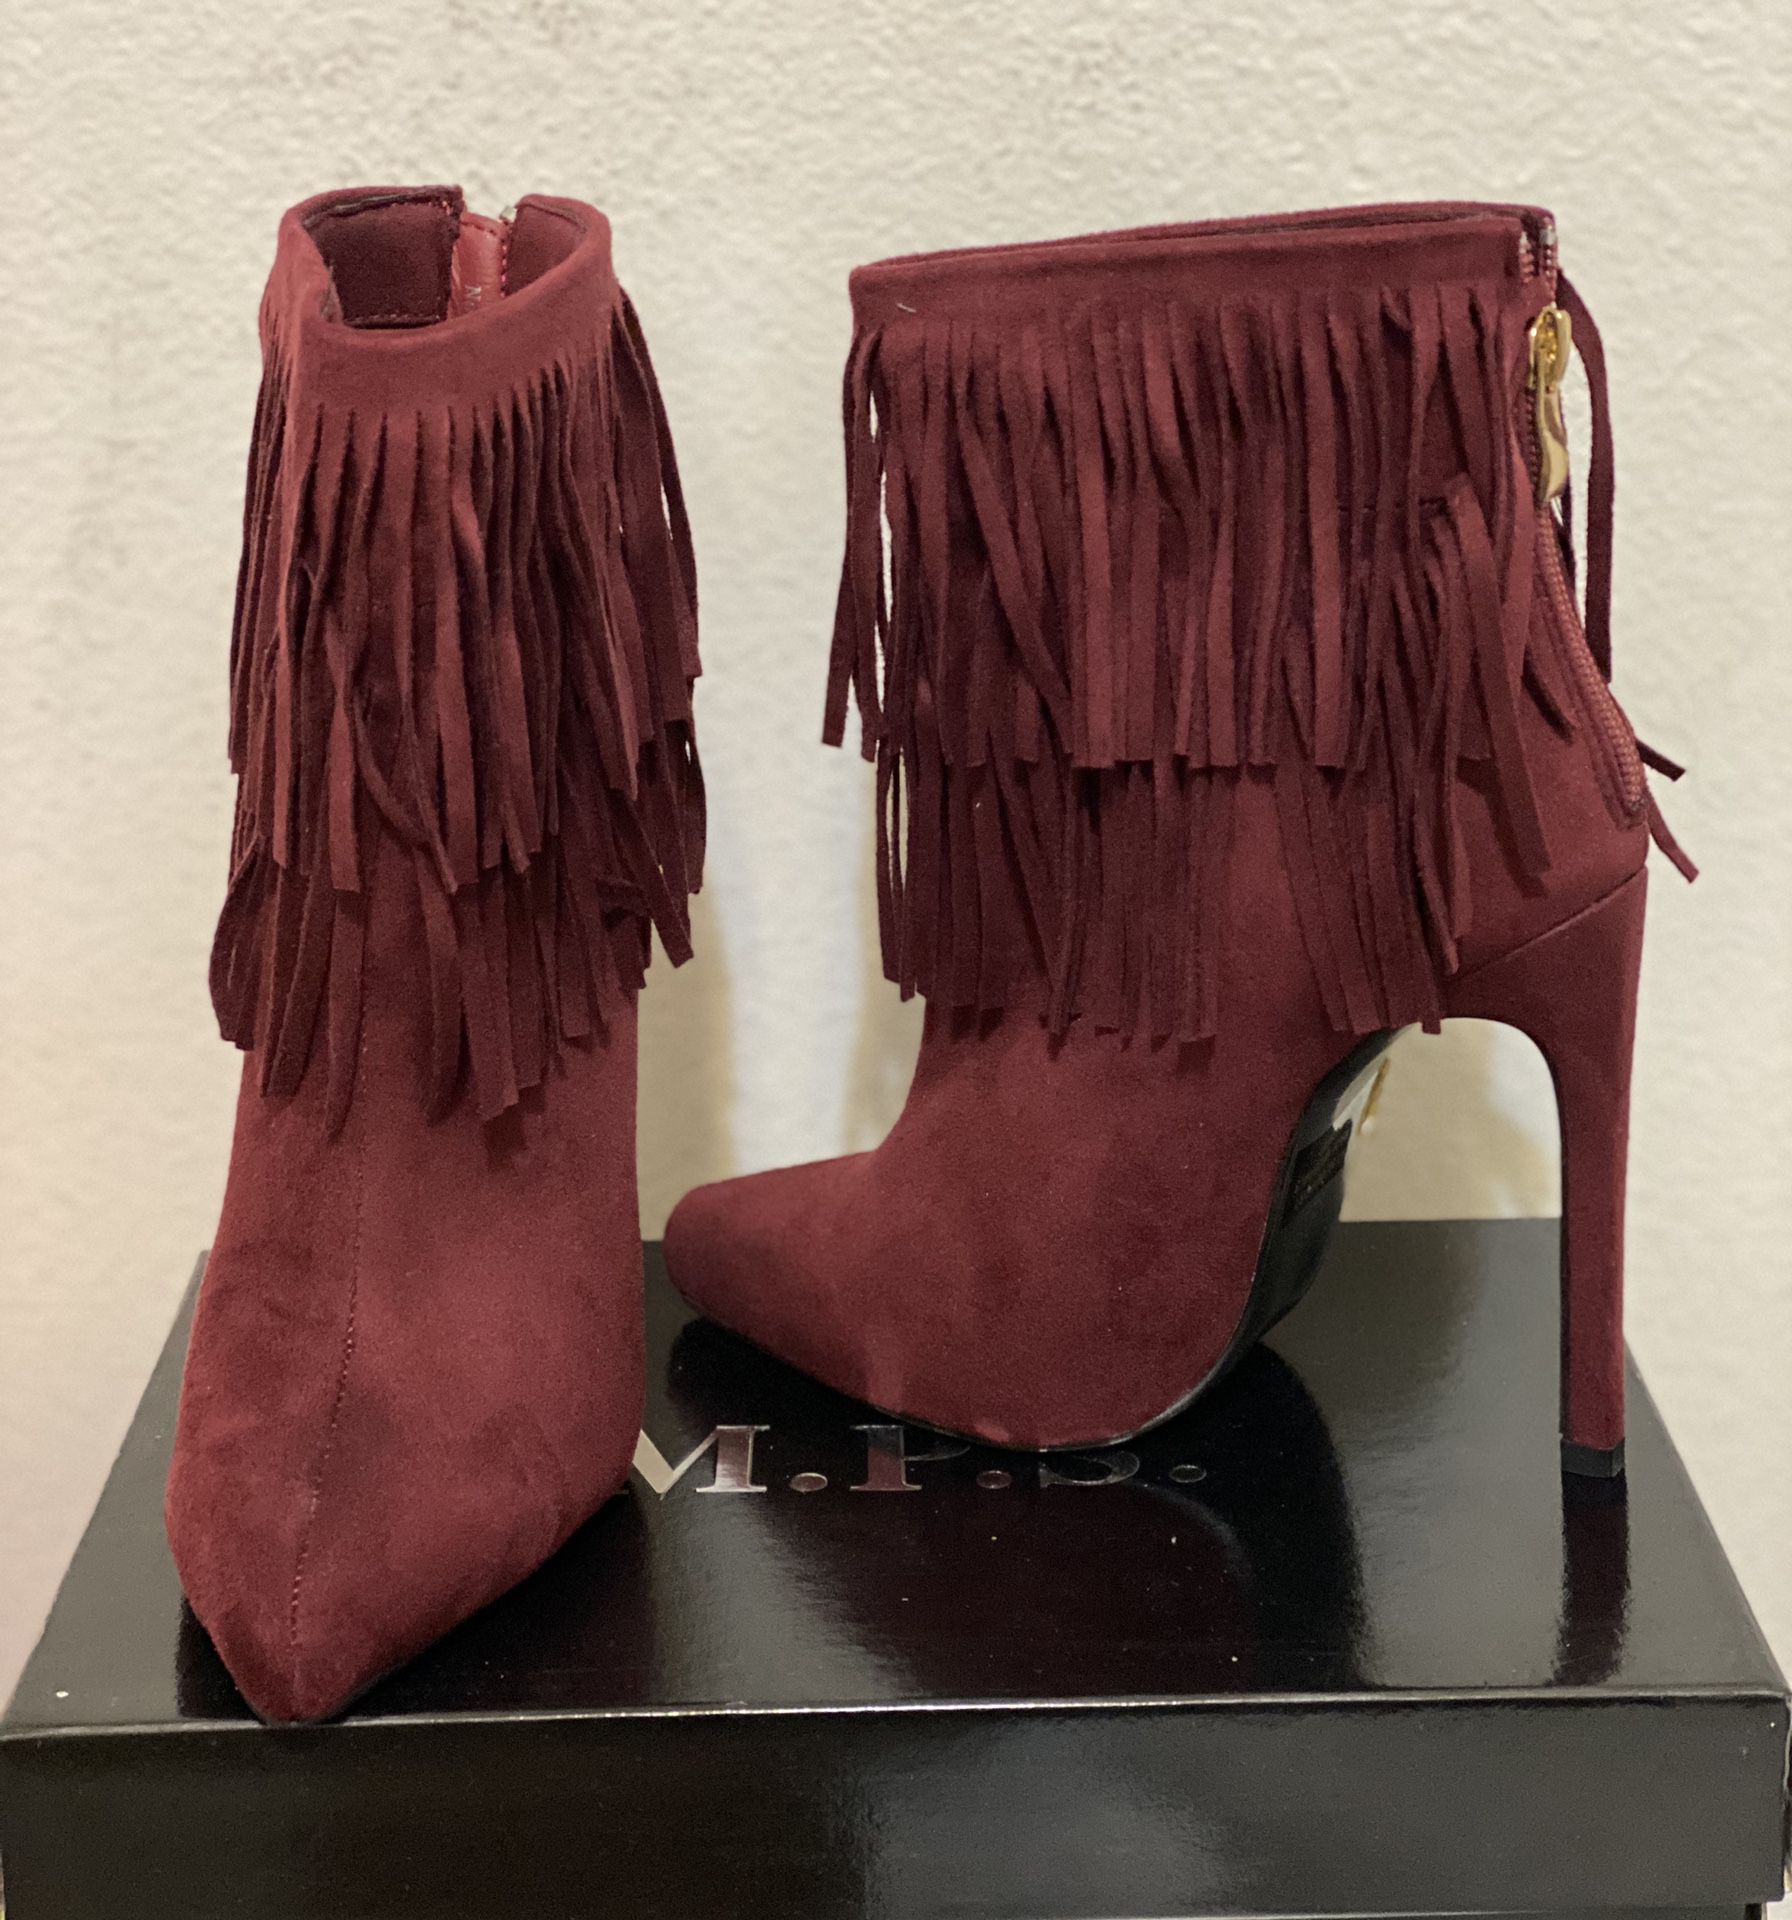 Women’s size 5 High heel short boot with fringe